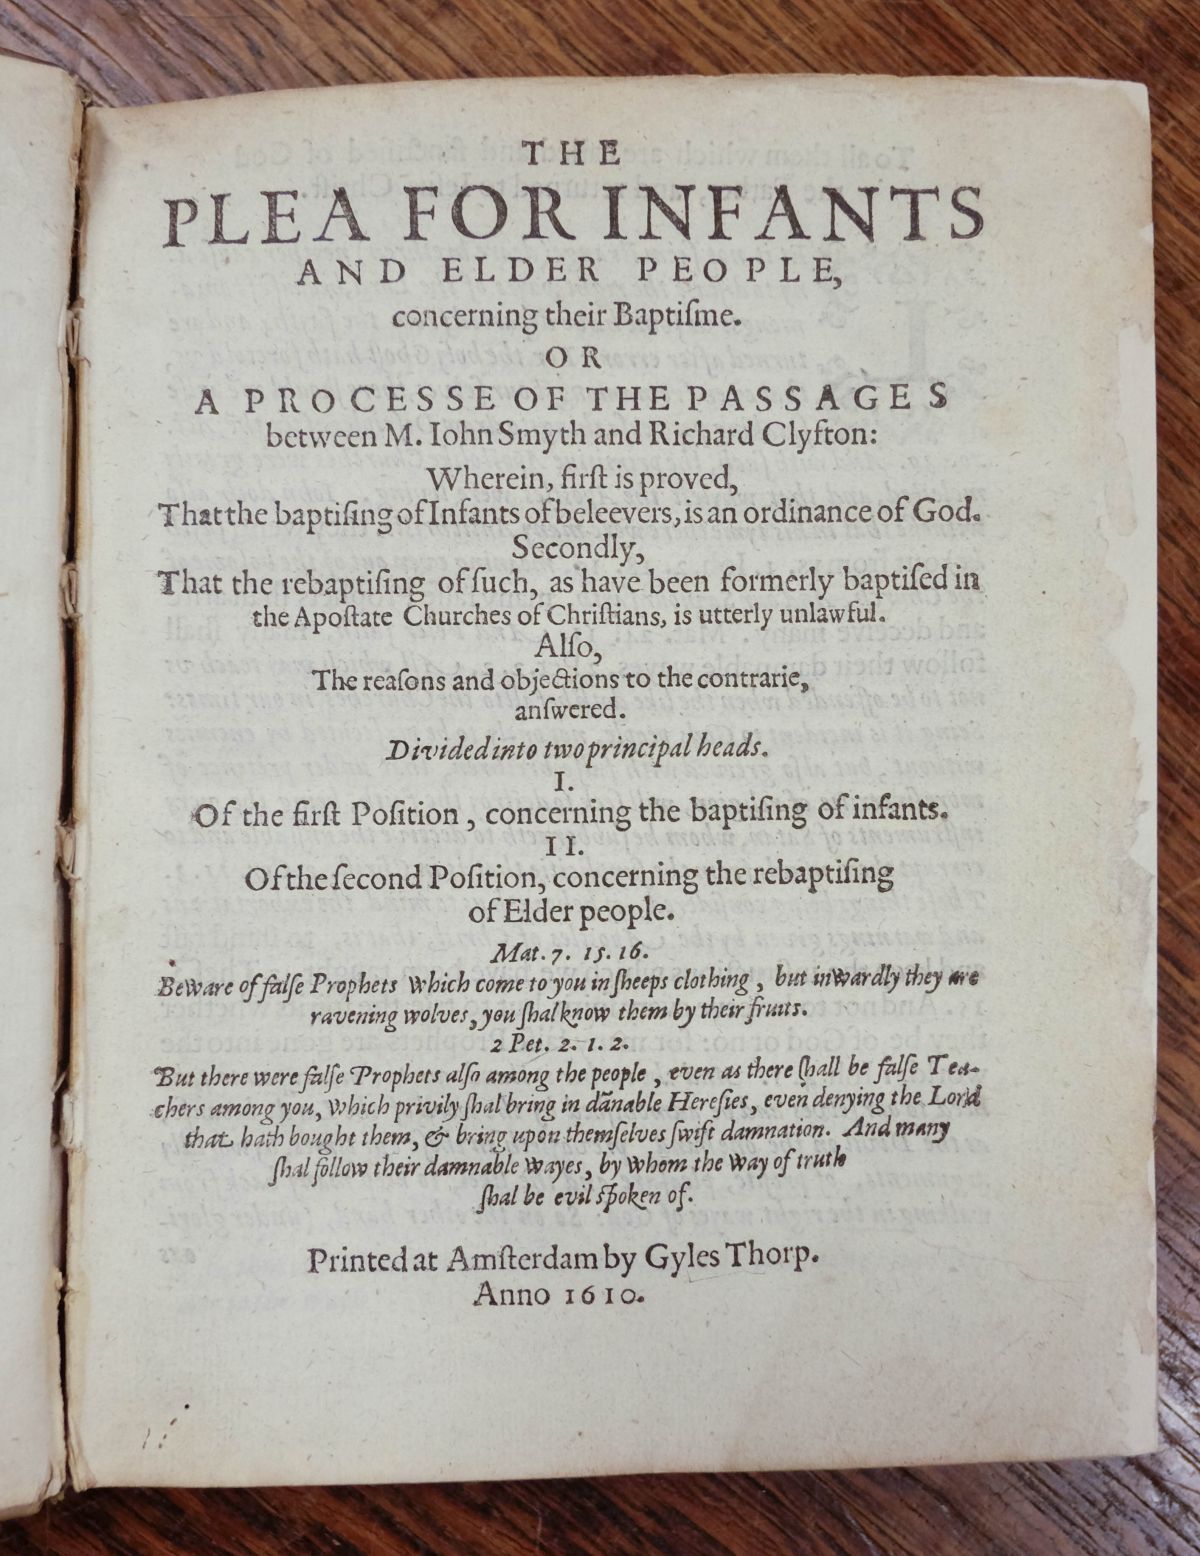 Clifton (Richard). The Plea for Infants and Elder People, 1610 - Image 8 of 14